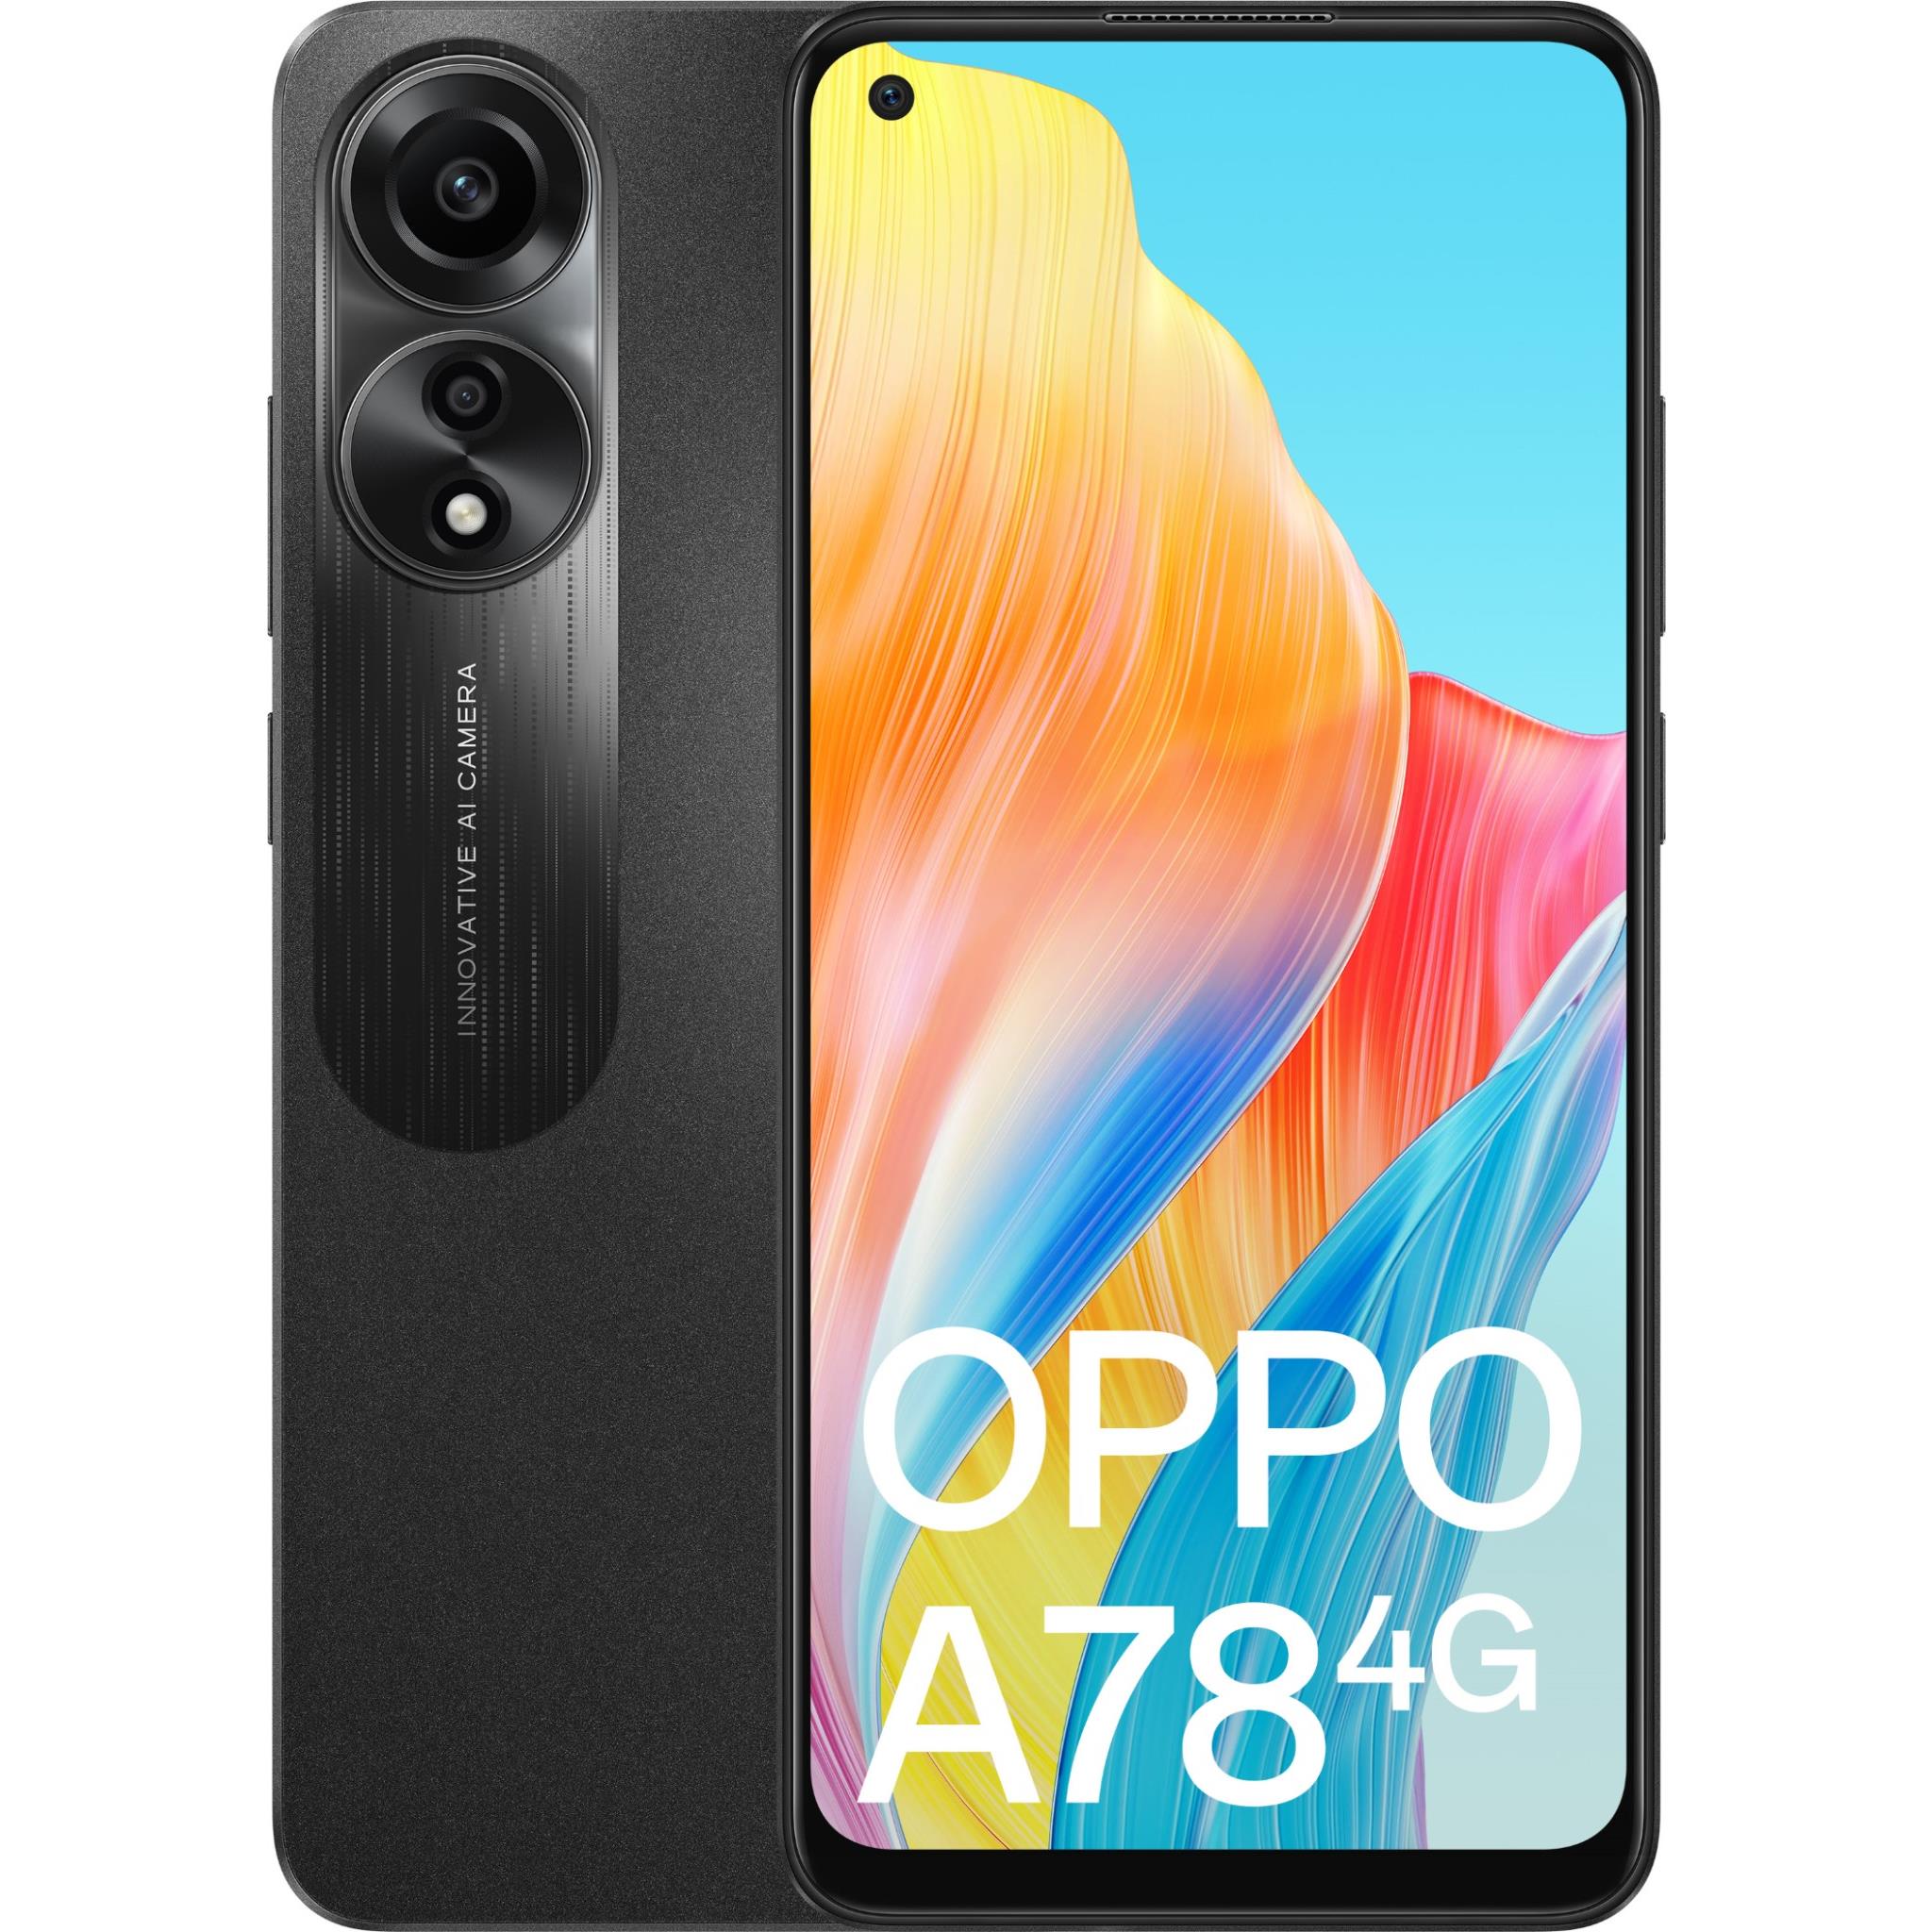 (New&Unlocked) OPPO A17 BLACK 4+64GB GLOBAL Ver. Dual SIM Android Cell Phone